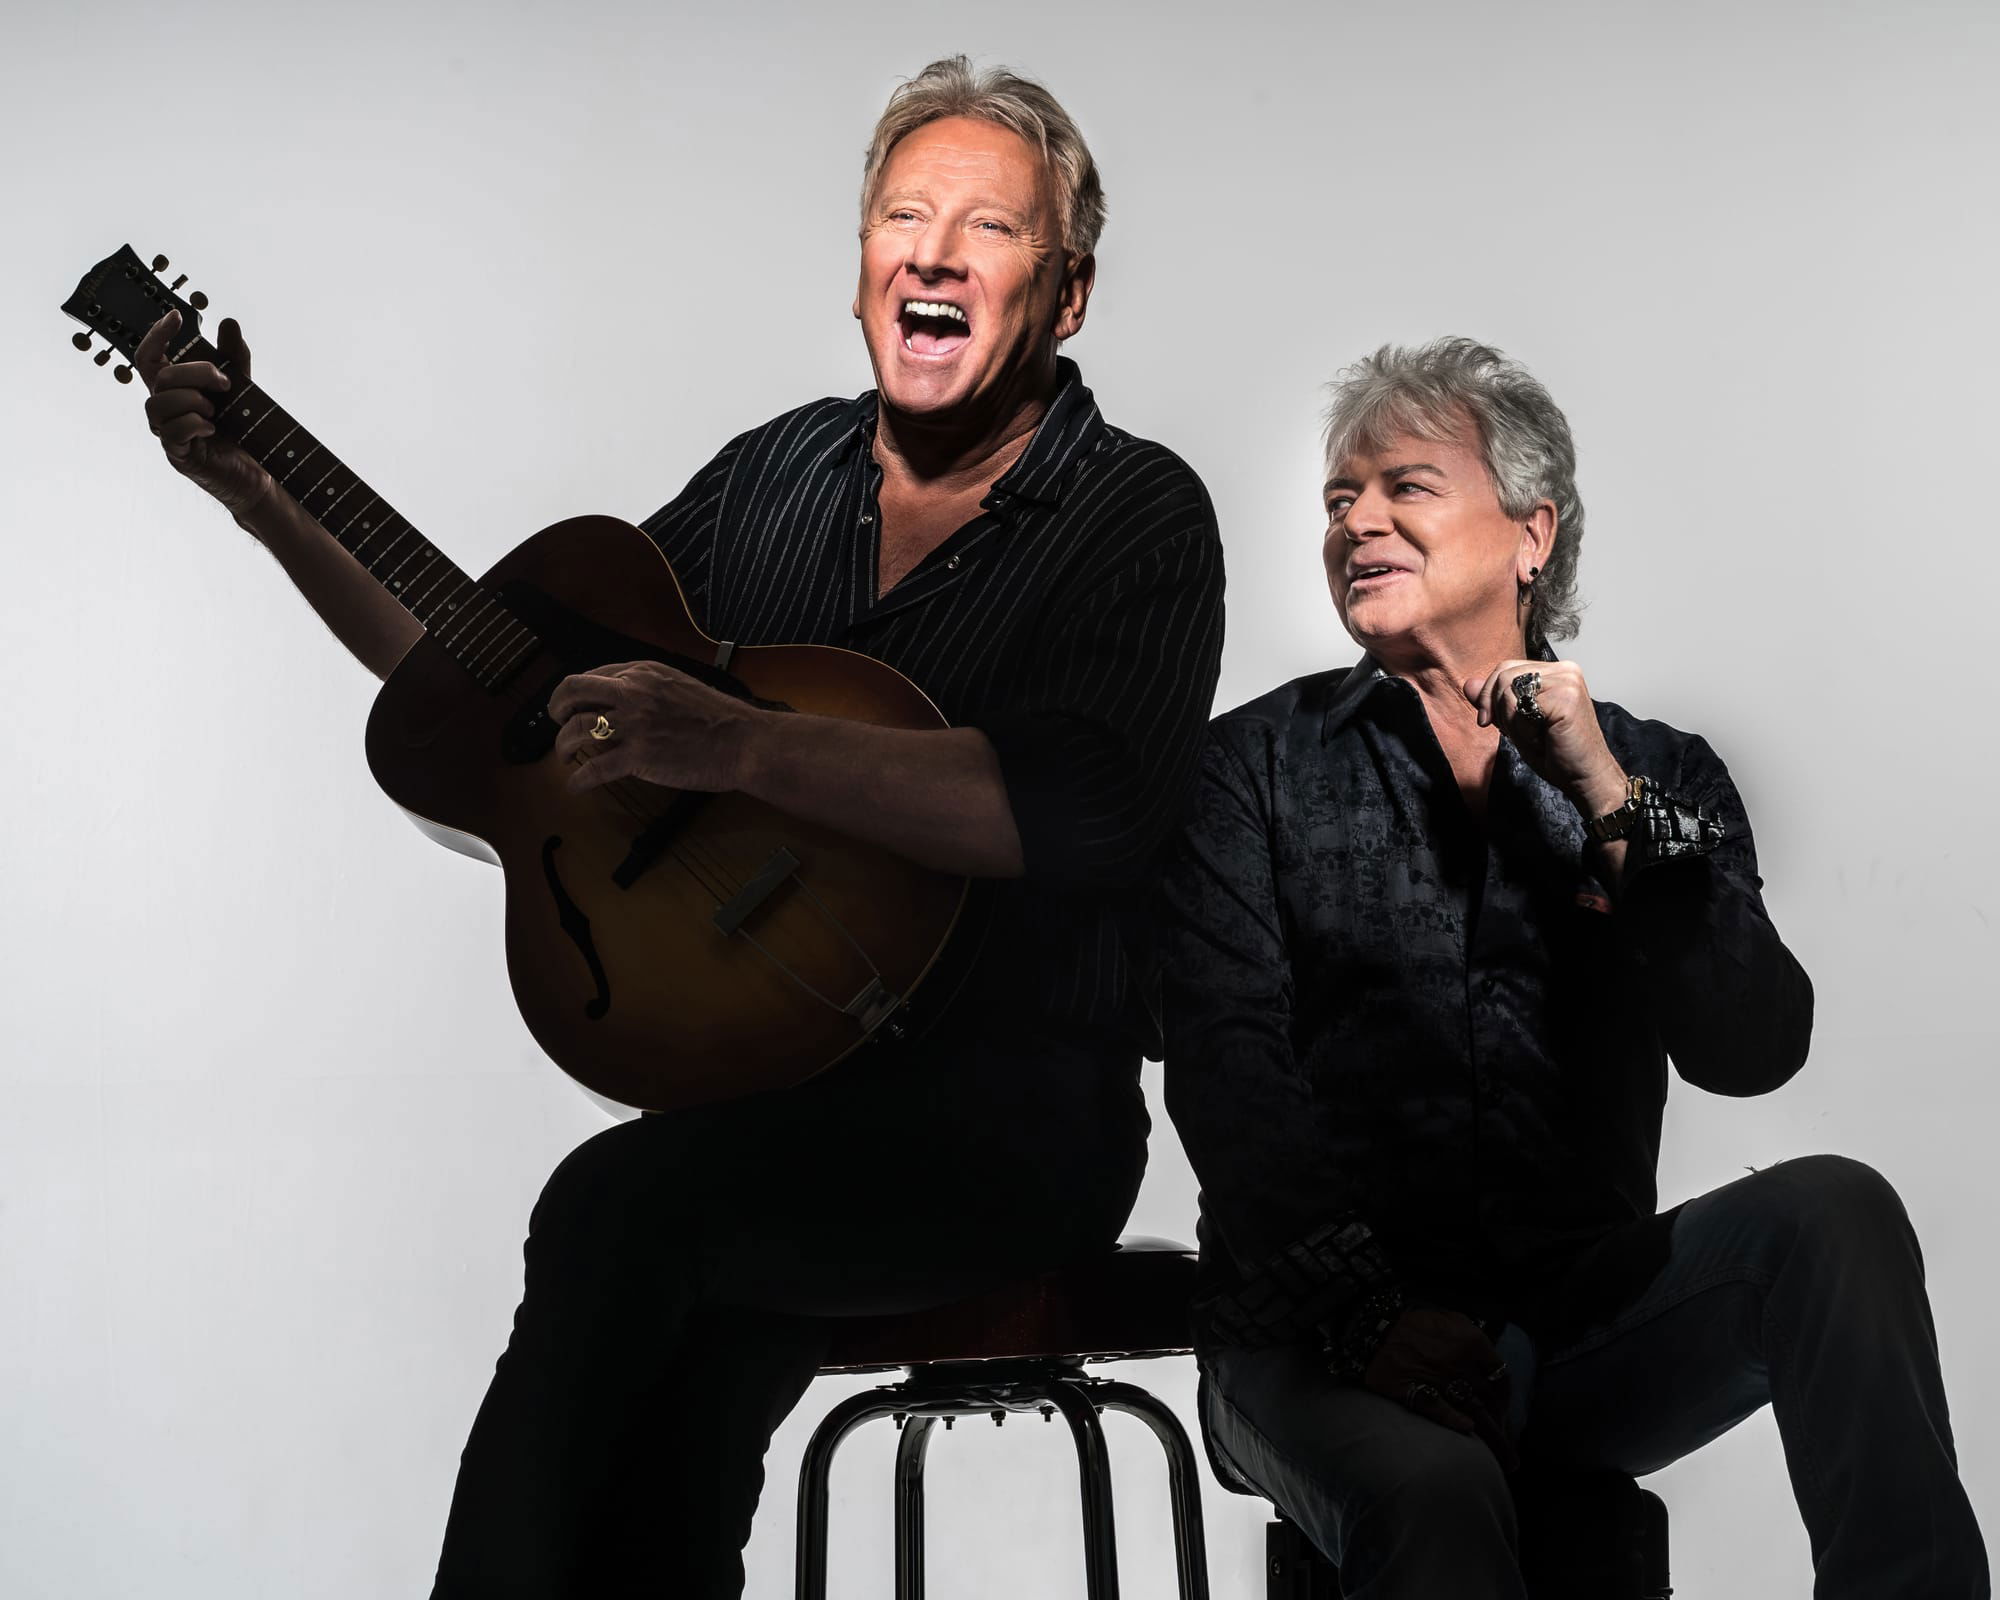 METRMAG Spotlight On: "Air Supply - Lost in Love Experience" -  Interview with Graham Russell